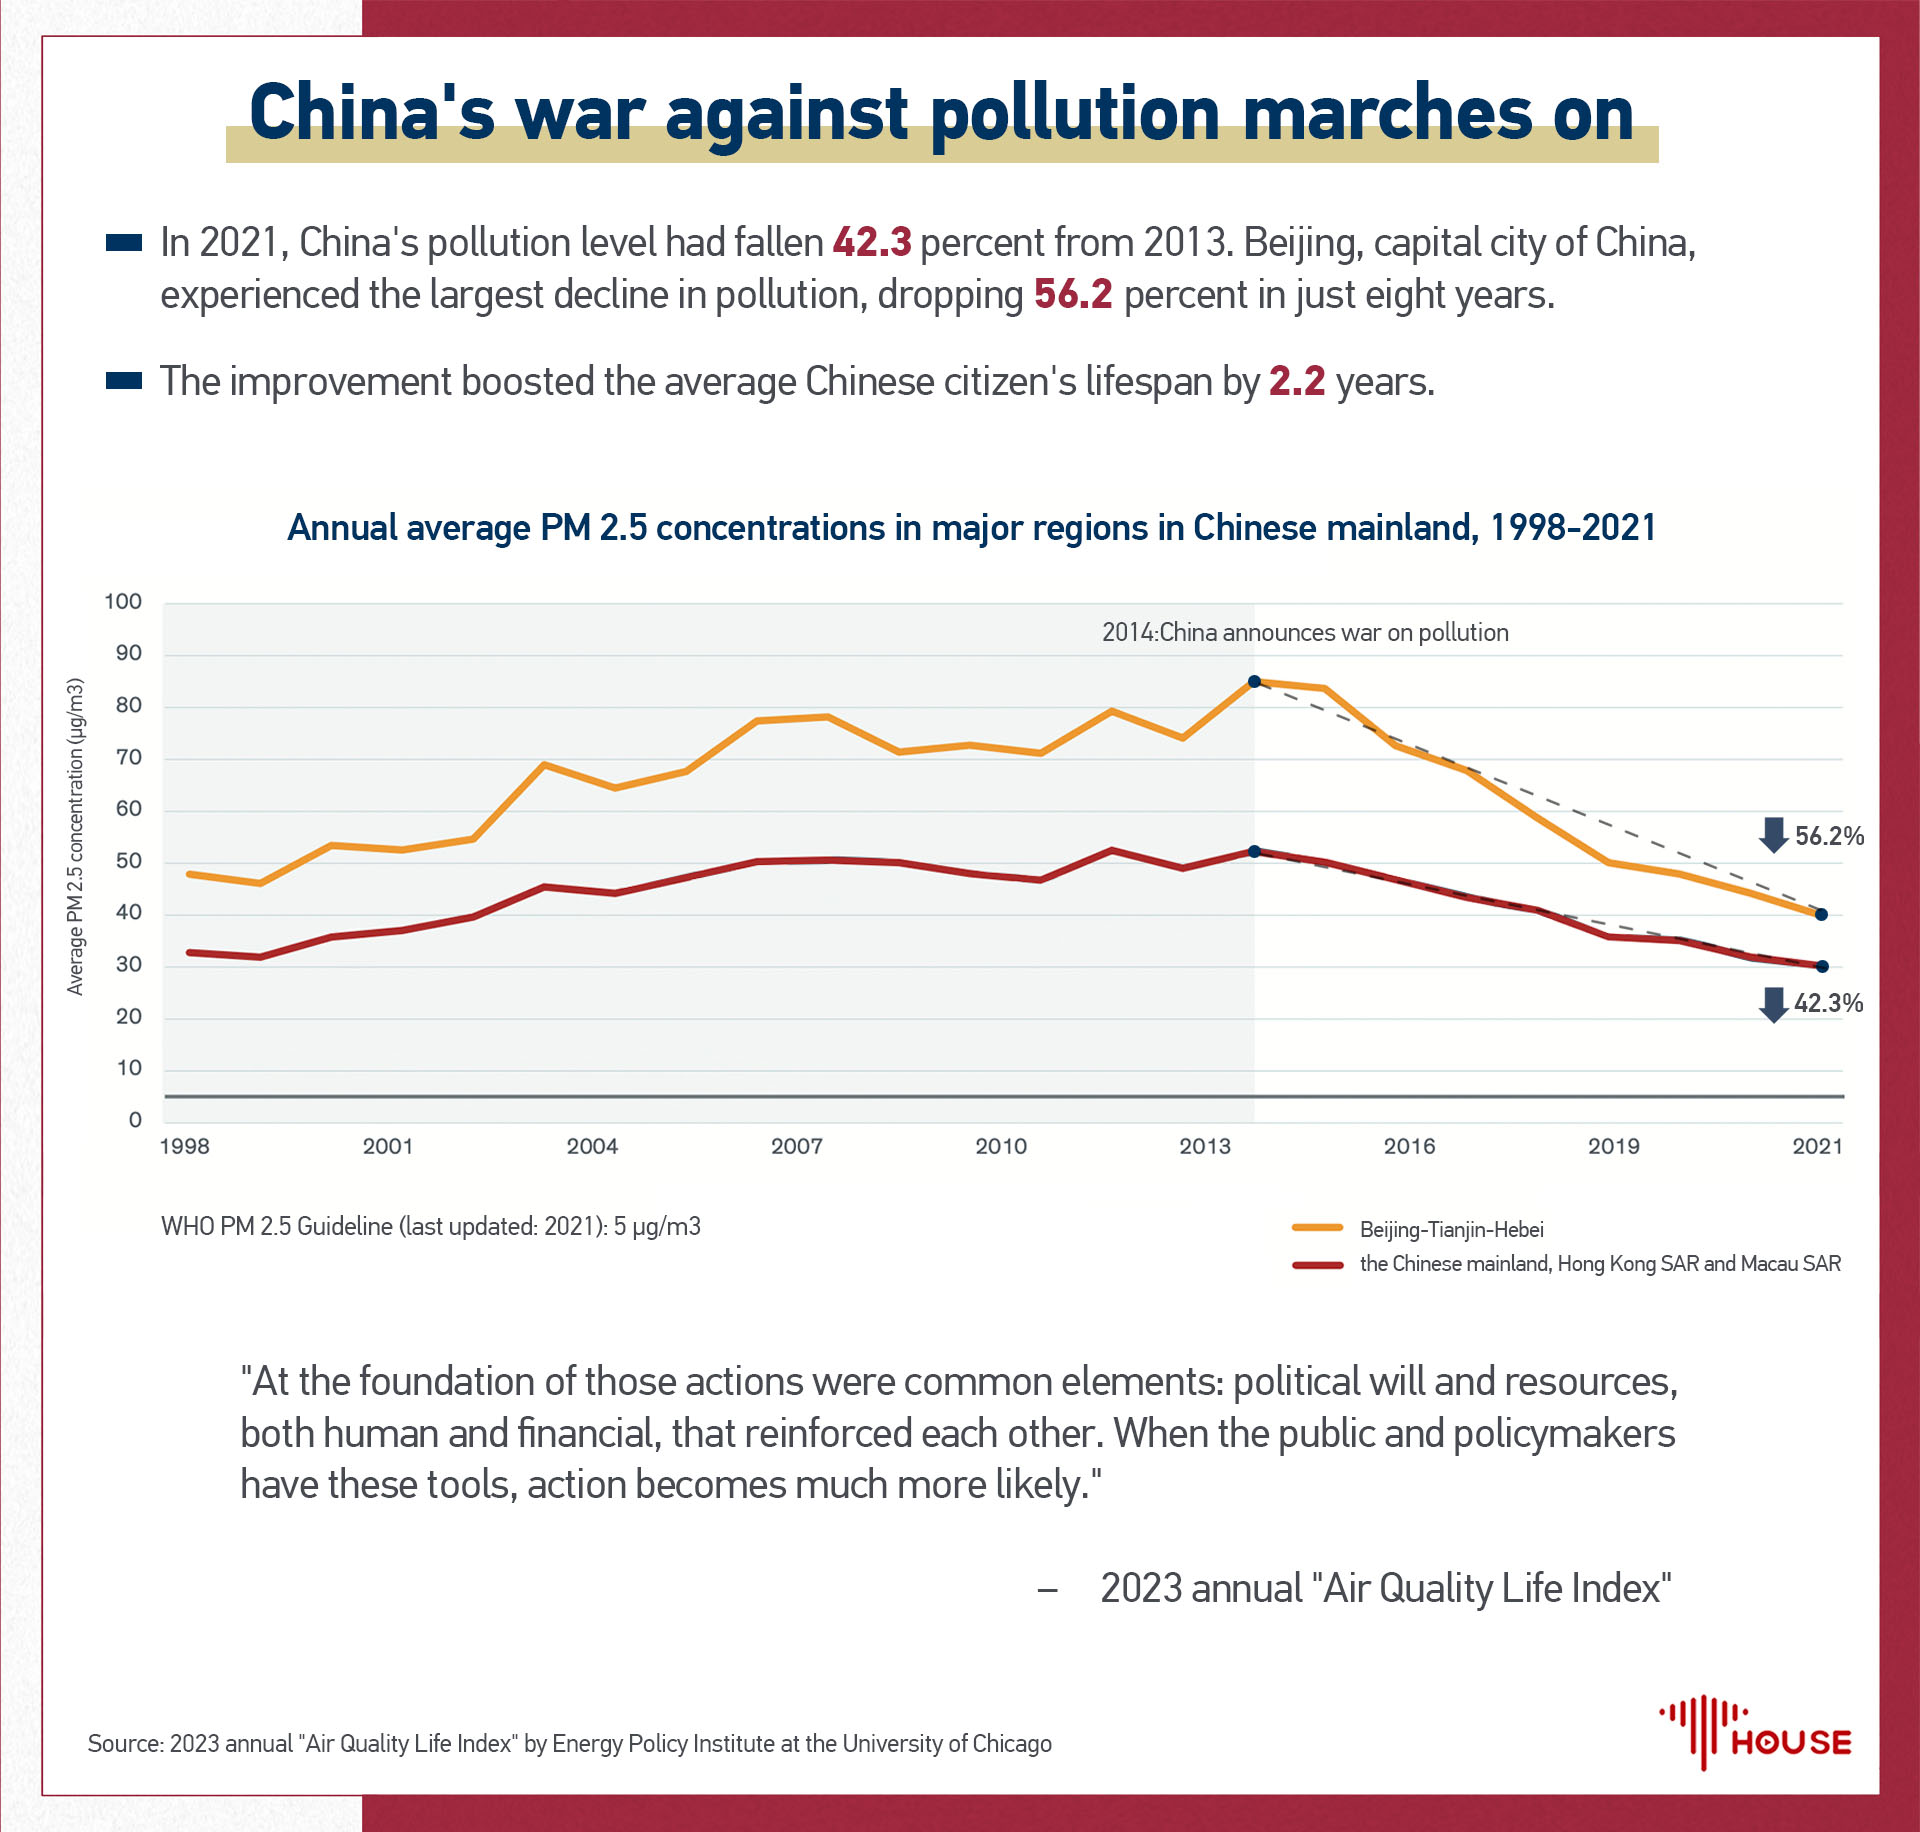 China's war against pollution marches on